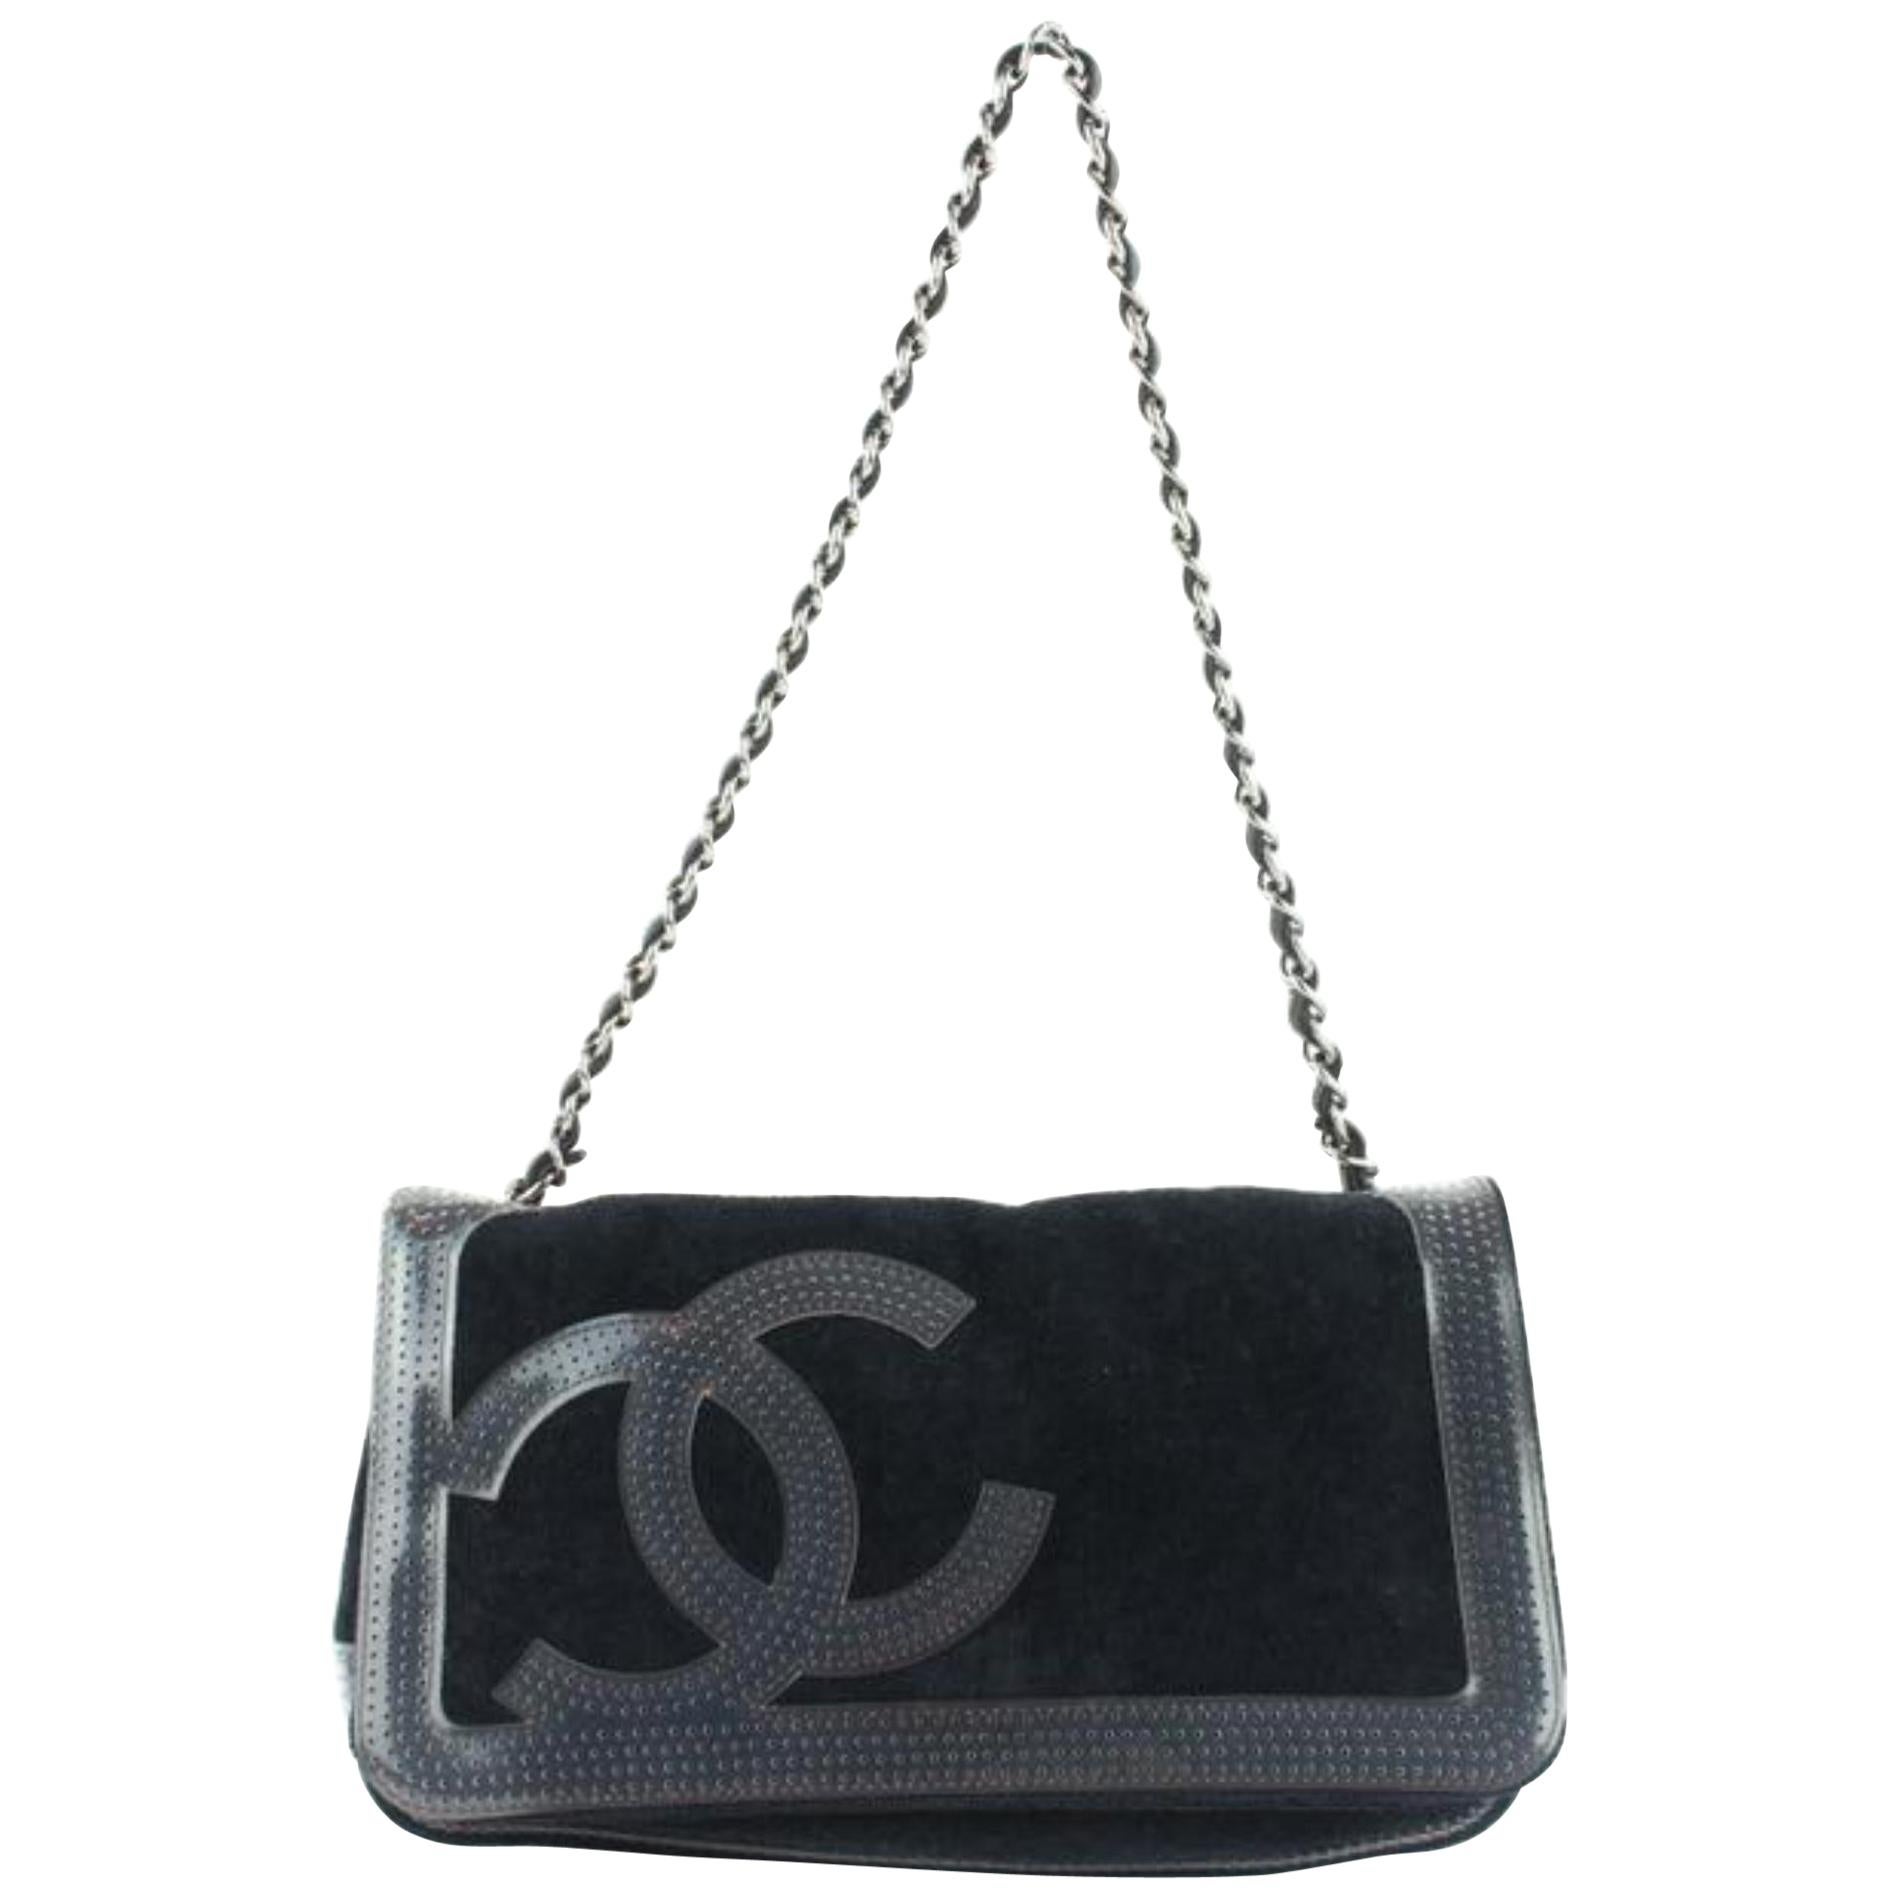 Chanel Perforated Chain Beach Flap 3cz1107 Black Terry Cloth Shoulder Bag For Sale